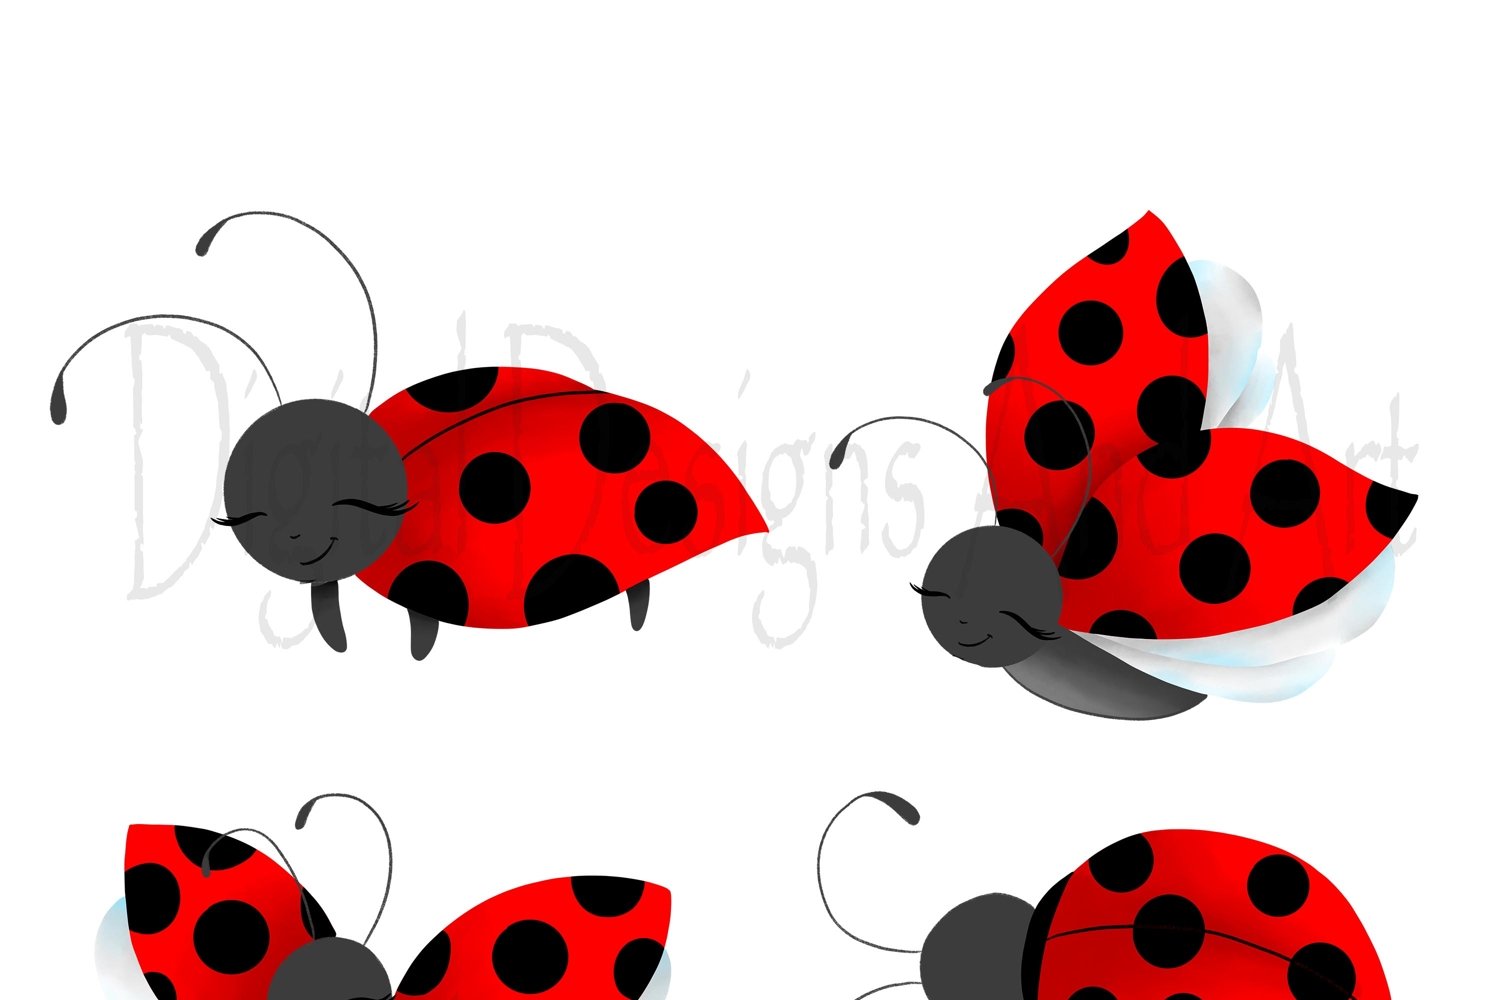 Cute and colorful ladybugs.